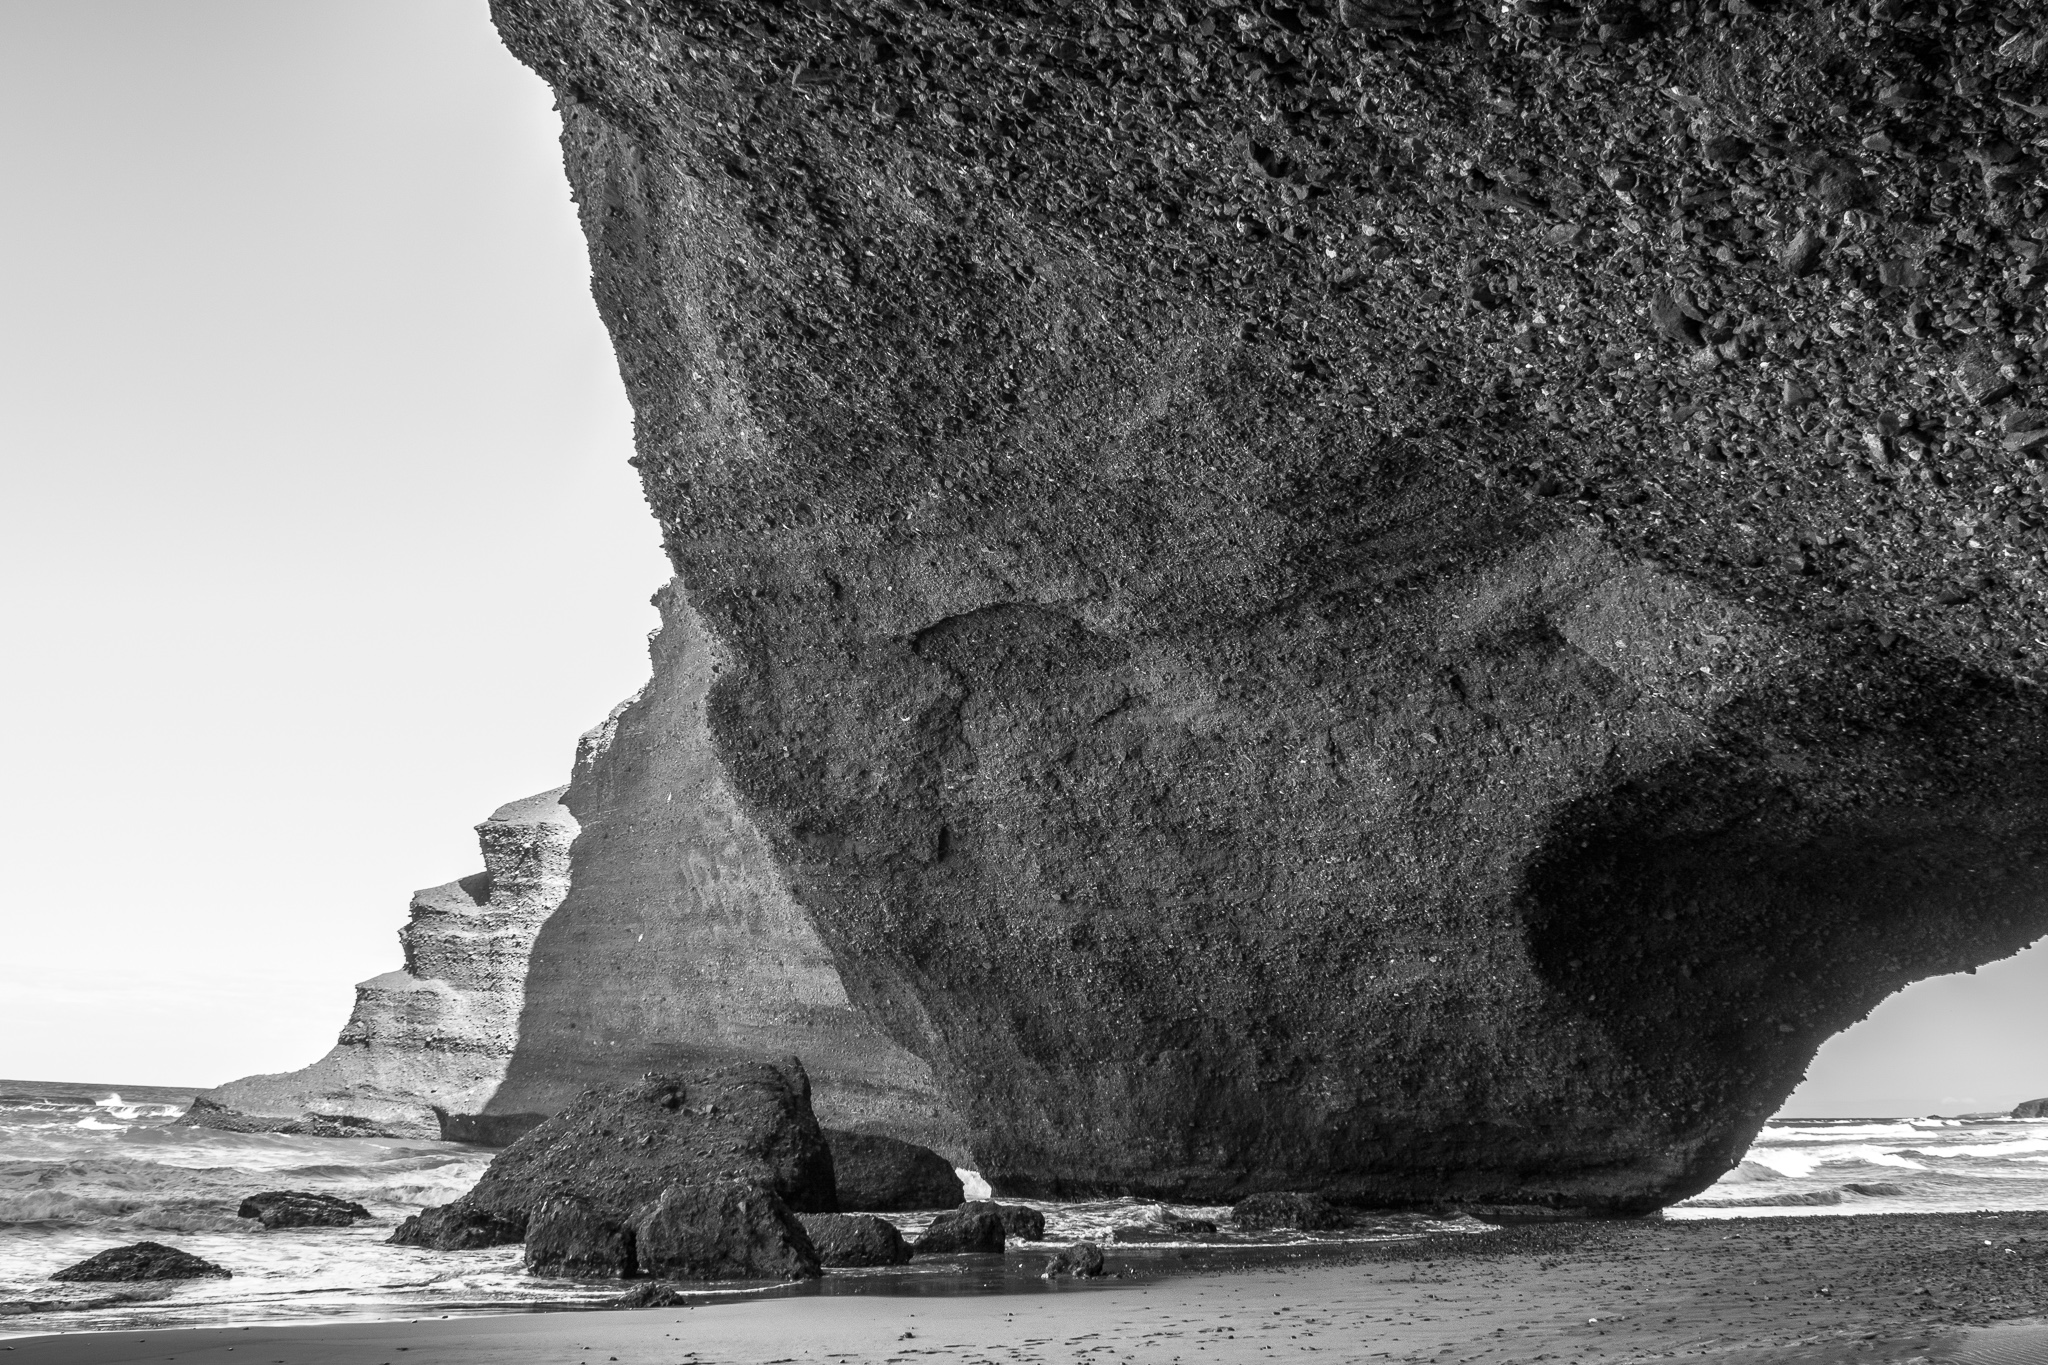 The beach of Legzira is located about 10 km north of the village of Sidi Ifni, the former Spanish colony of Morocco. <br> Its monumental natural bridges, red stone arches and elephant's foot, have been carved by marine erosion for centuries. <br> Recently, in 2016, after a cracking collapsed one of the most emblematic arches of the beach.